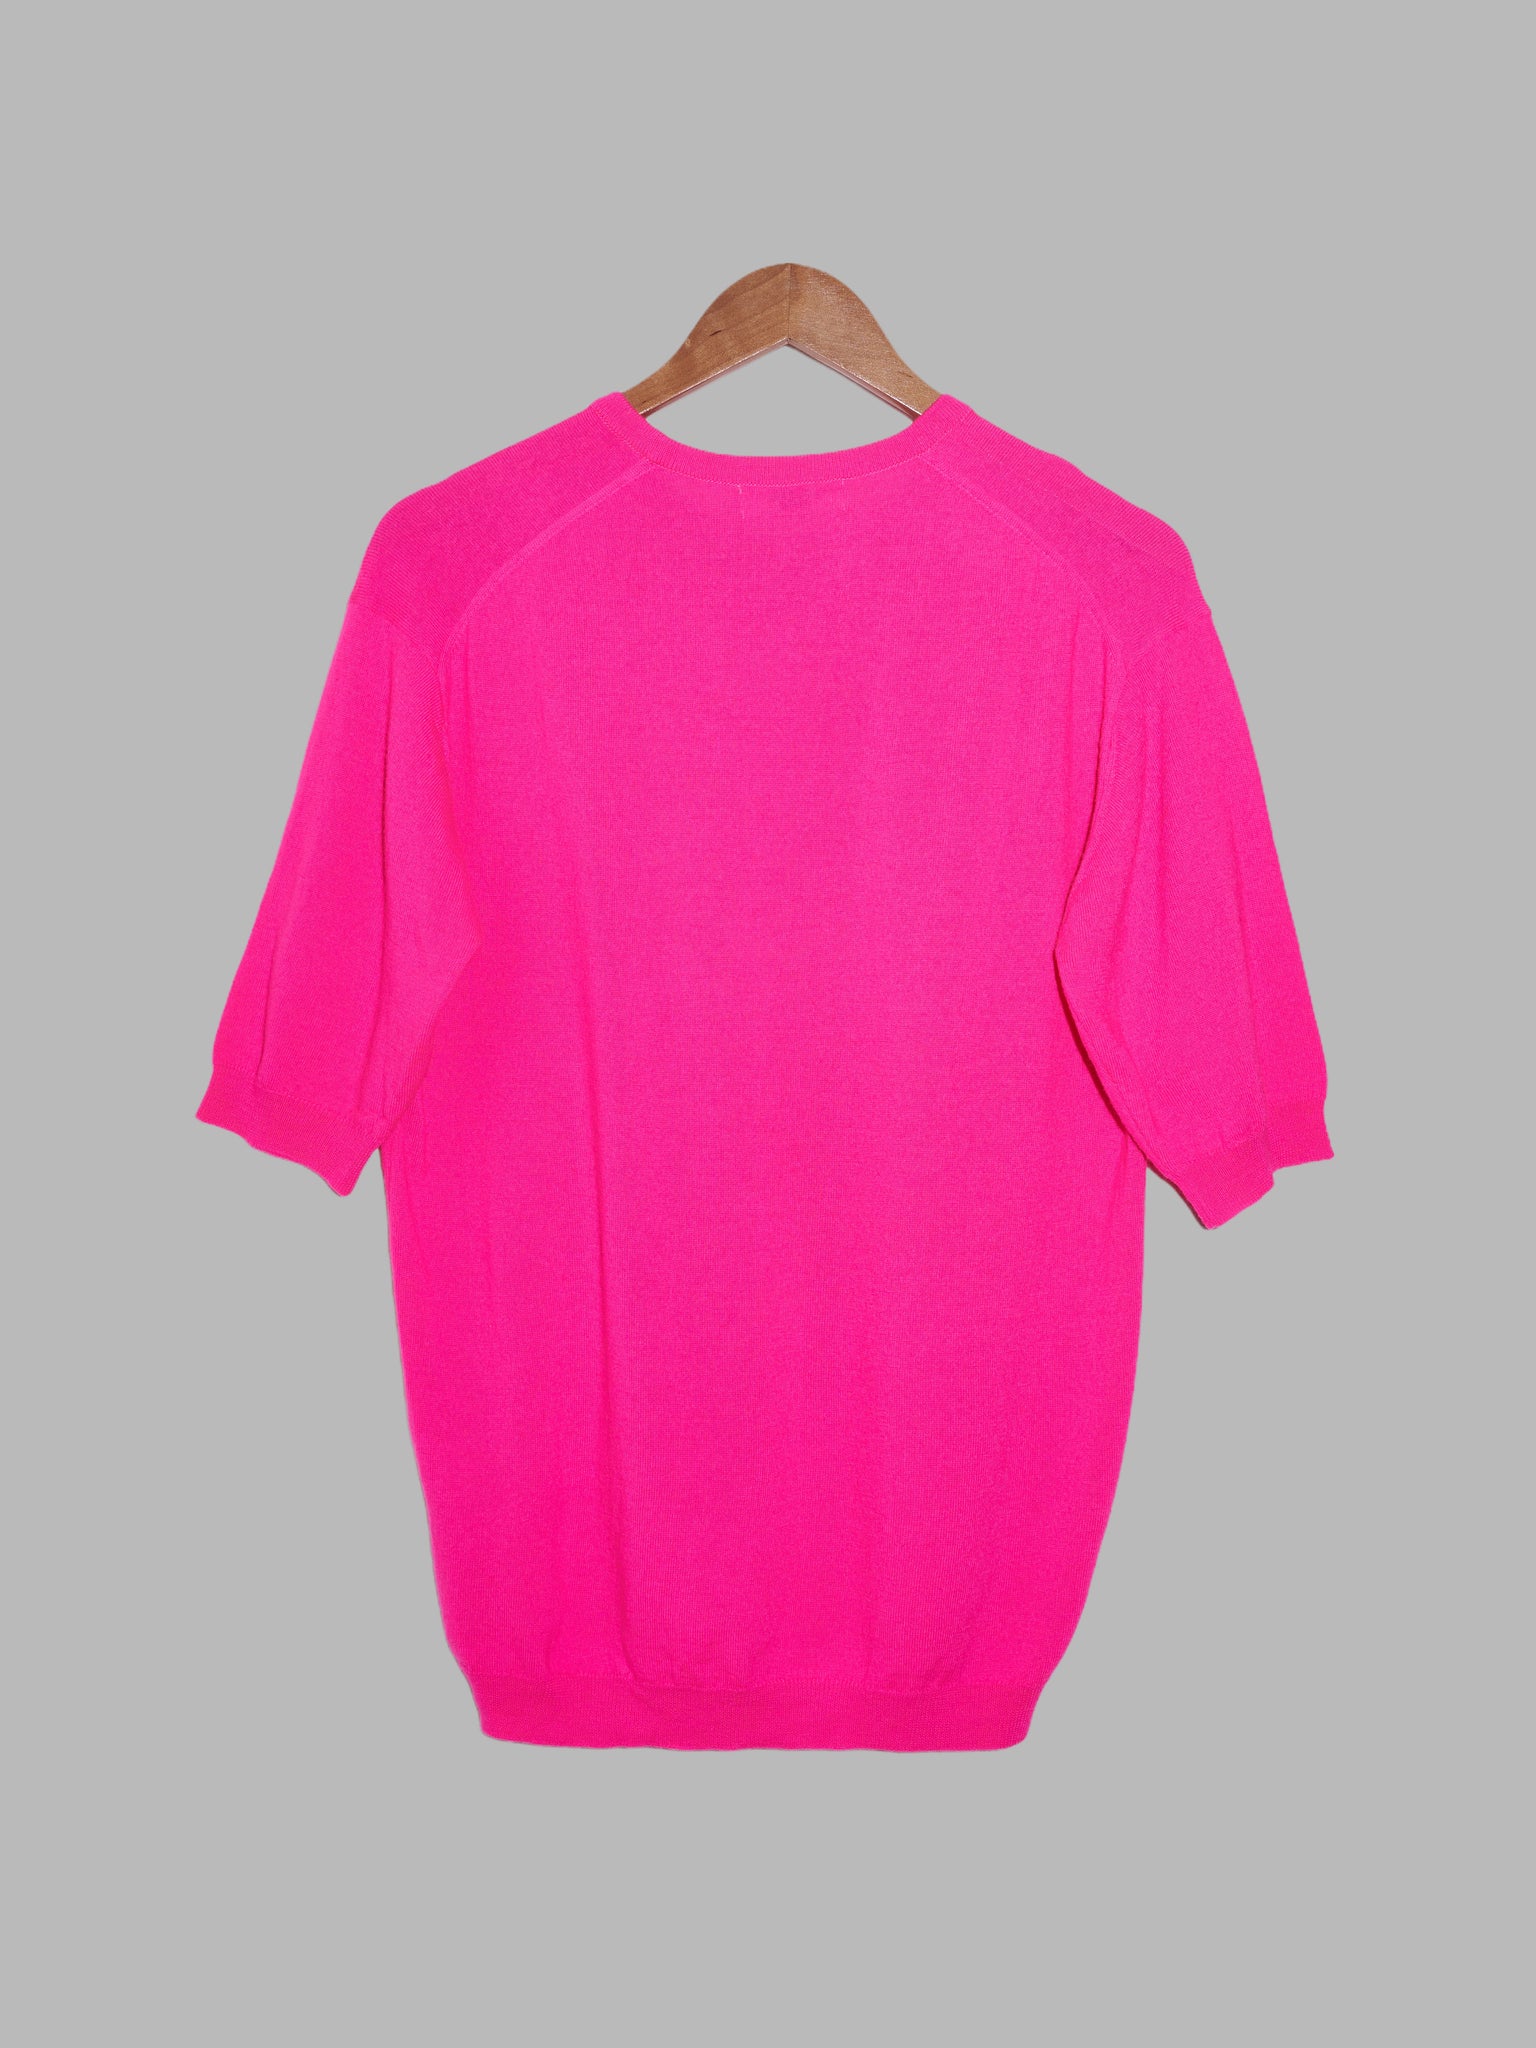 Robe de Chambre Comme des Garcons 1989 shocking pink wool short sleeve sweater